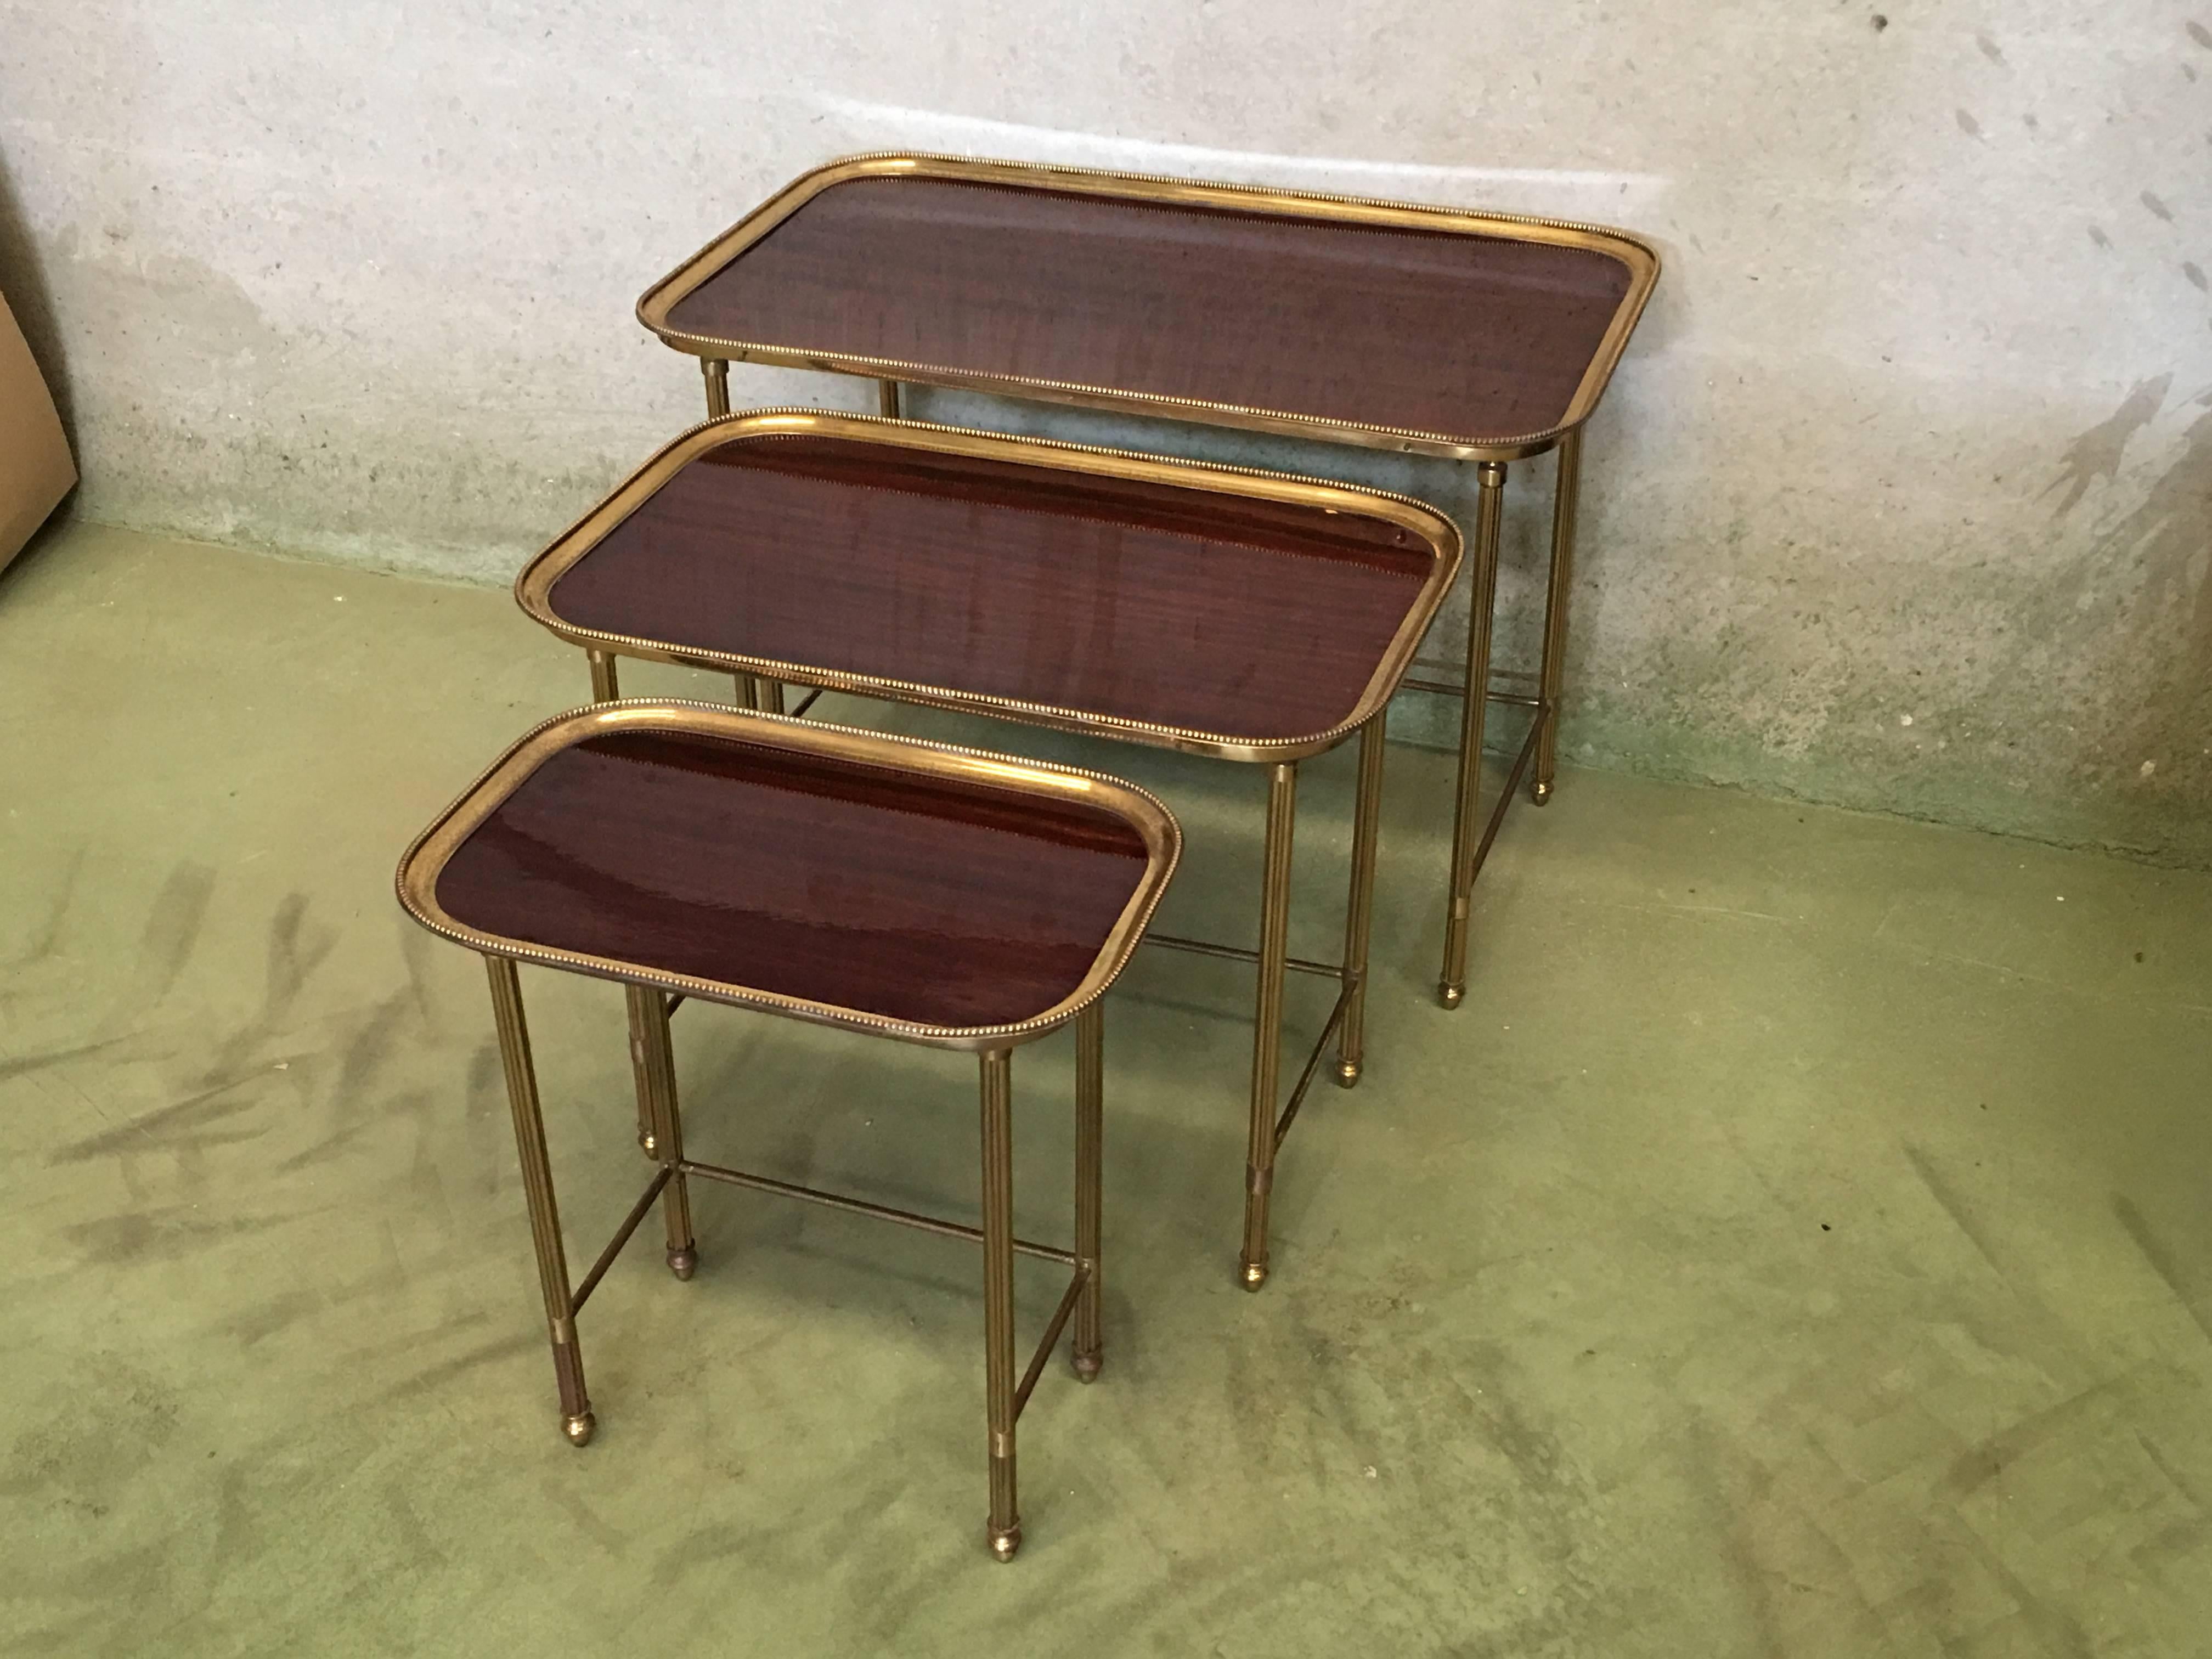 19th century set of three nesting tables in brass and mahogany, France

Dimensions: Width 28.34, depth 16.73, height 19.88
Dimensions: Width 22.57, depth 13.77, height 18.50
Dimensions: Width 16.53, depth 10.62, height 16.92.